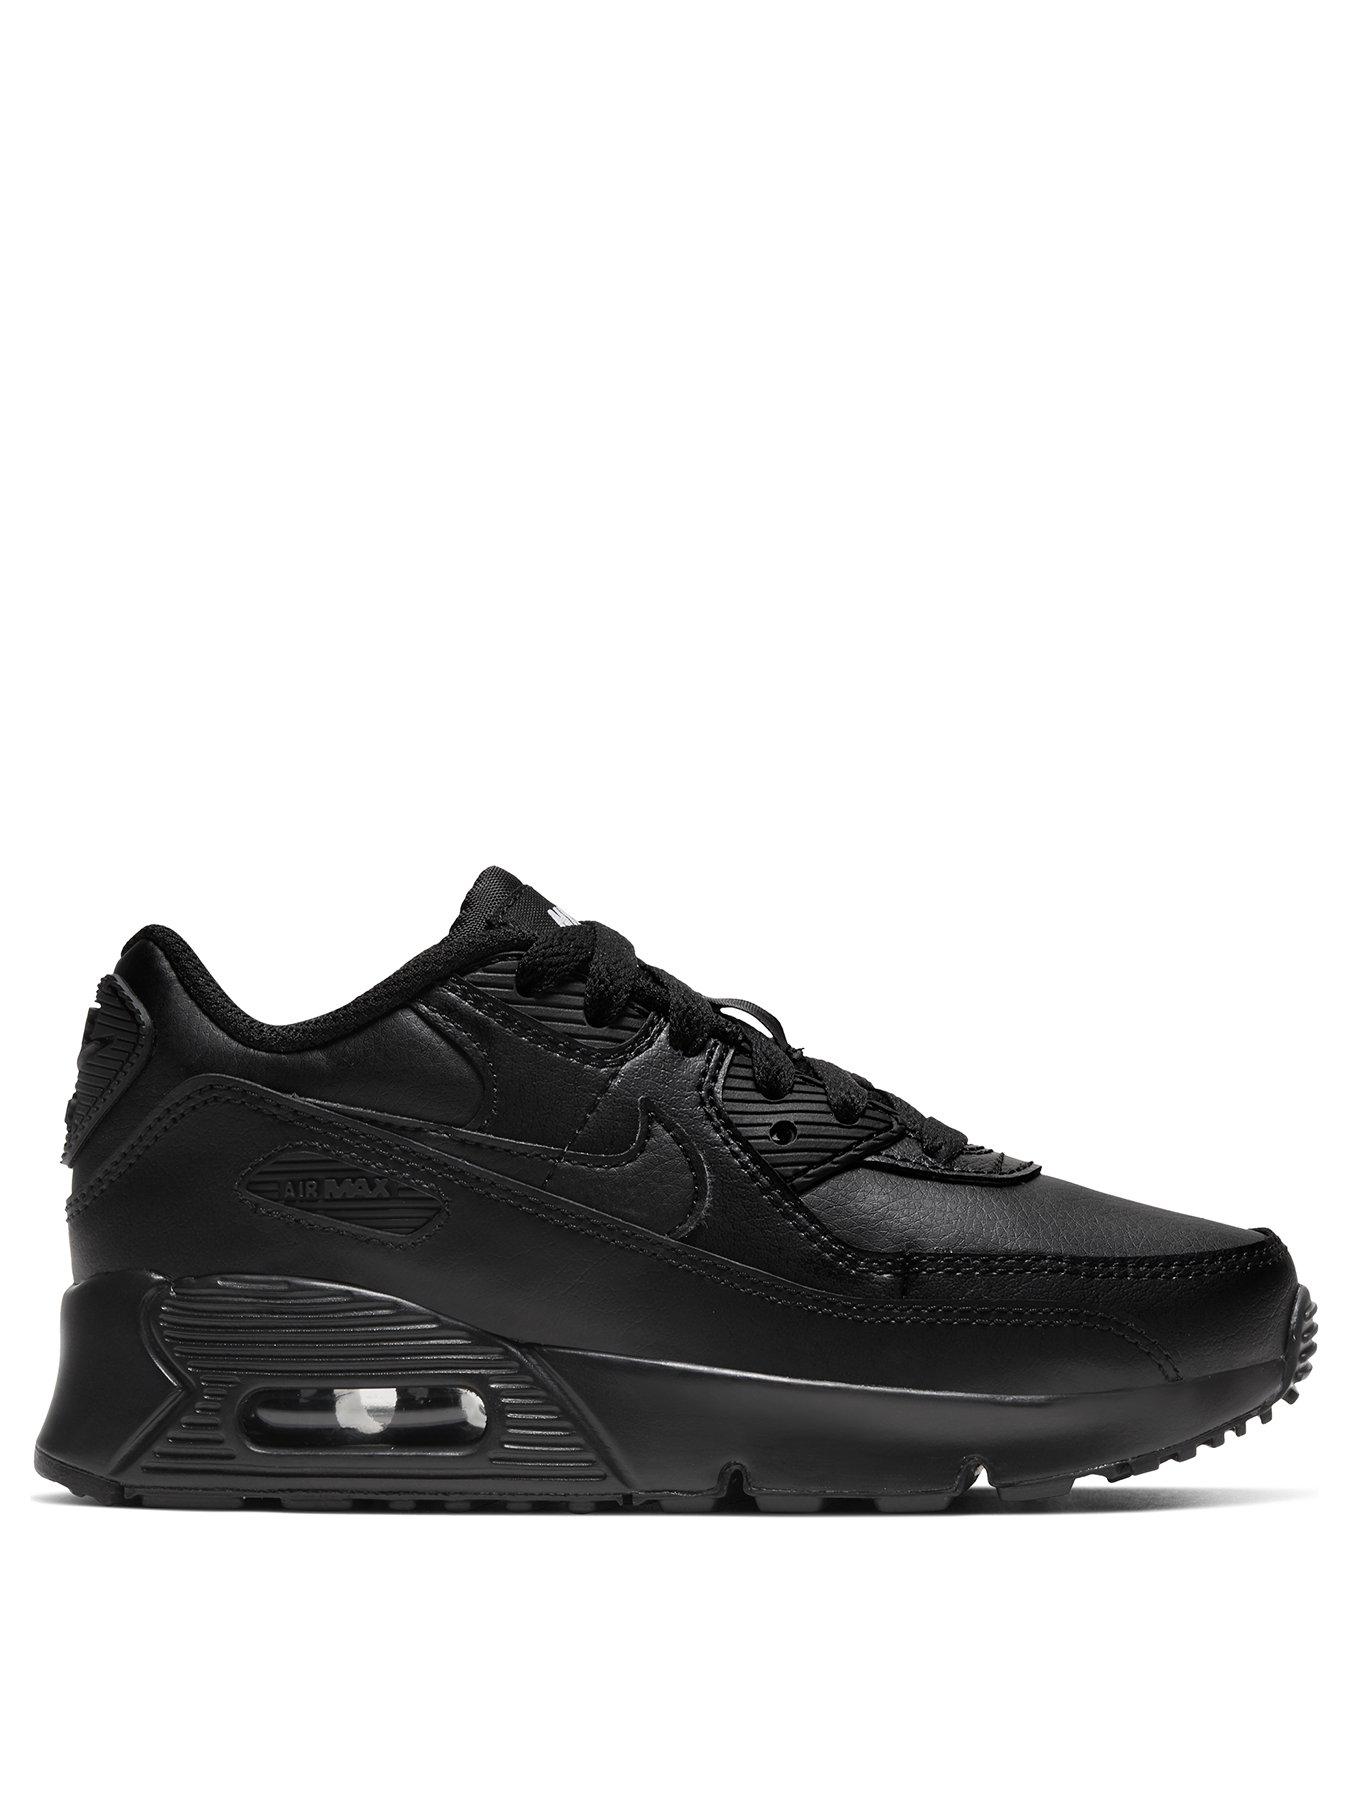 Nike Air Max 90 Leather Childrens Trainers - Black | very.co.uk